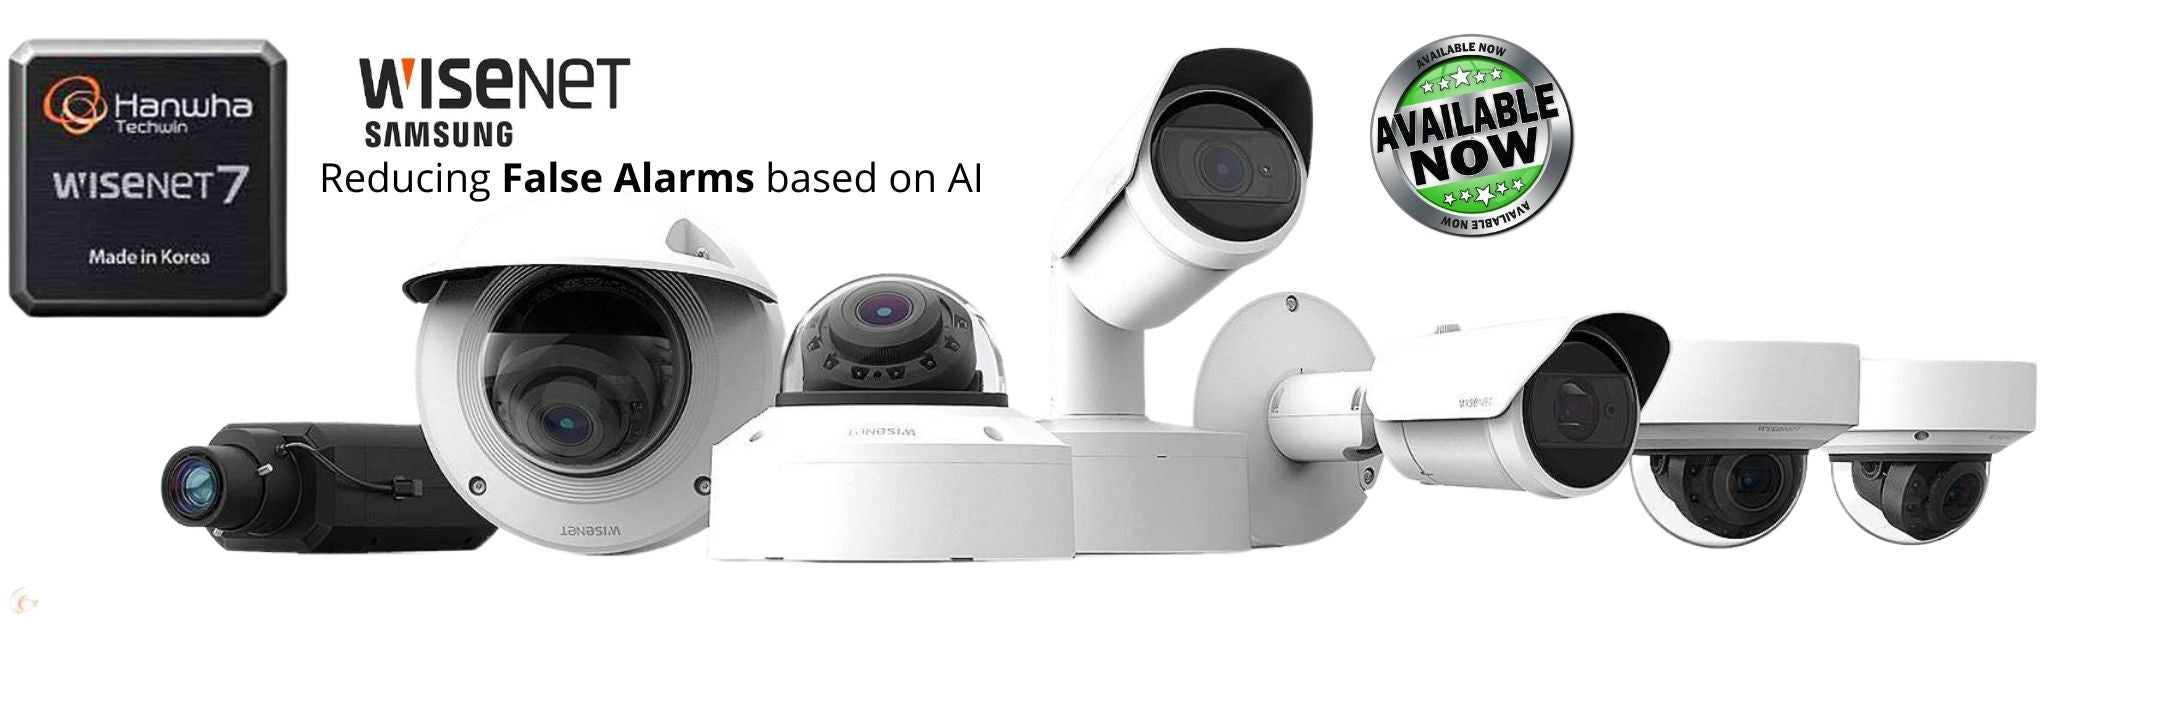 The Wisenet Samsung cameras series are quality CCTV products that offer essential features in creating a safe and secure environment, delivering a clear image quality.